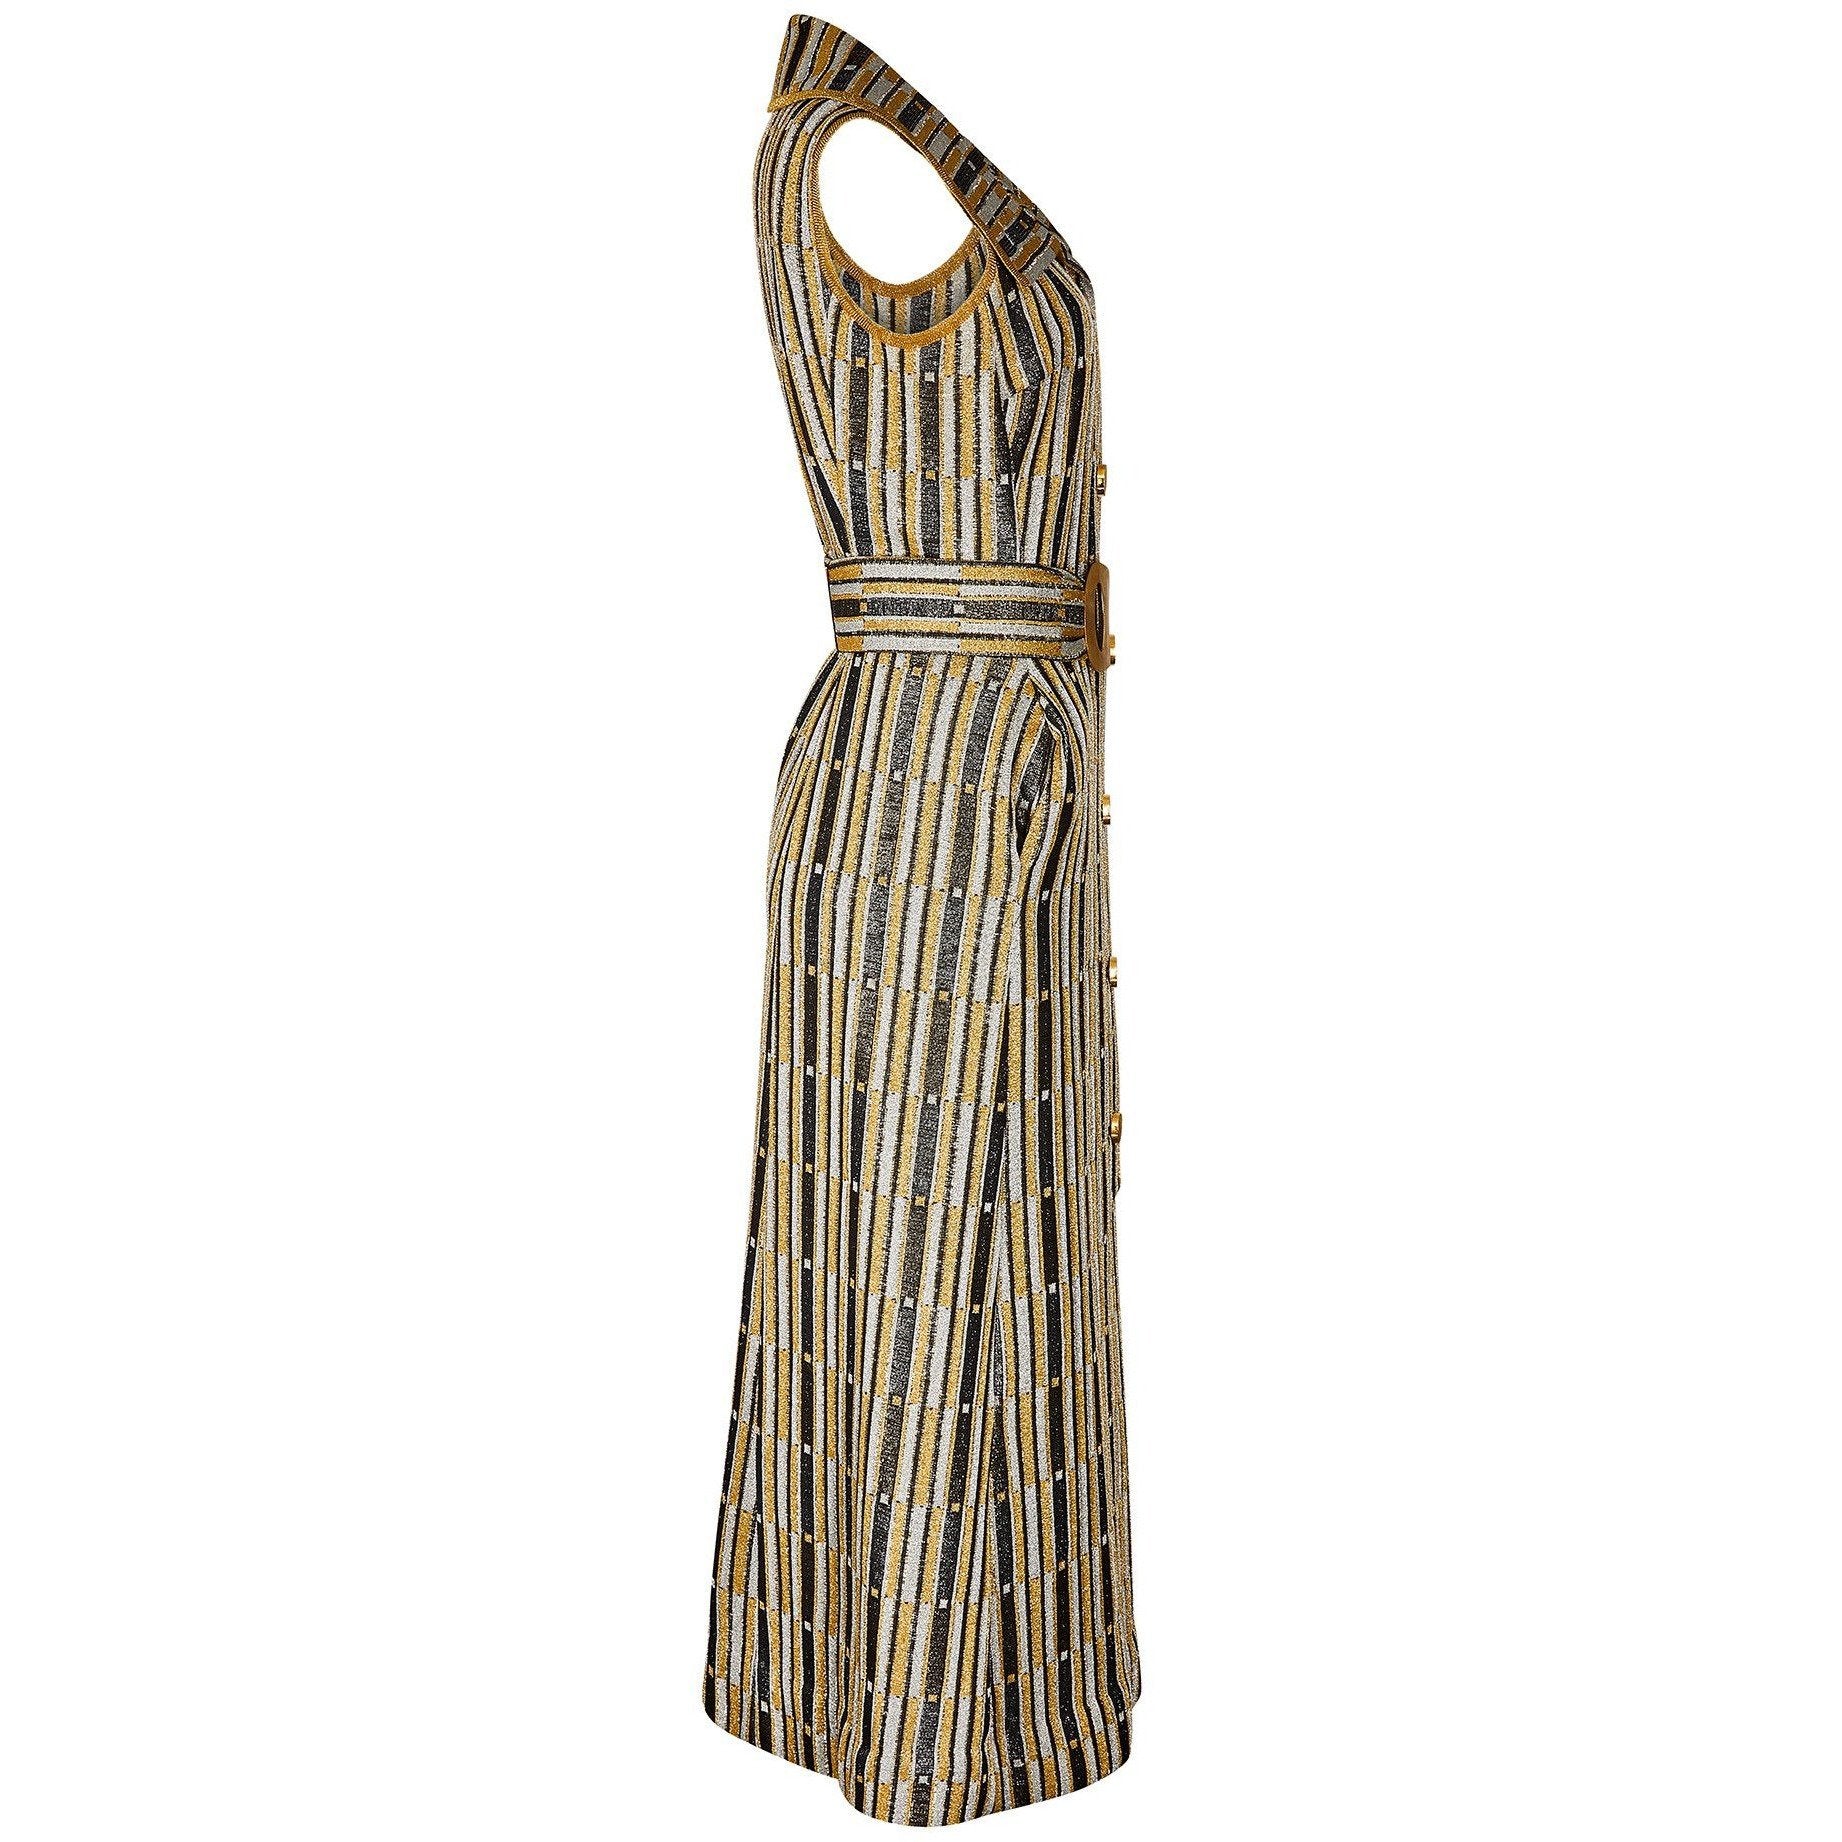 ARCHIVE - 1970s Aled Couture Gold Black and Silver Lame Dress with Ove ...